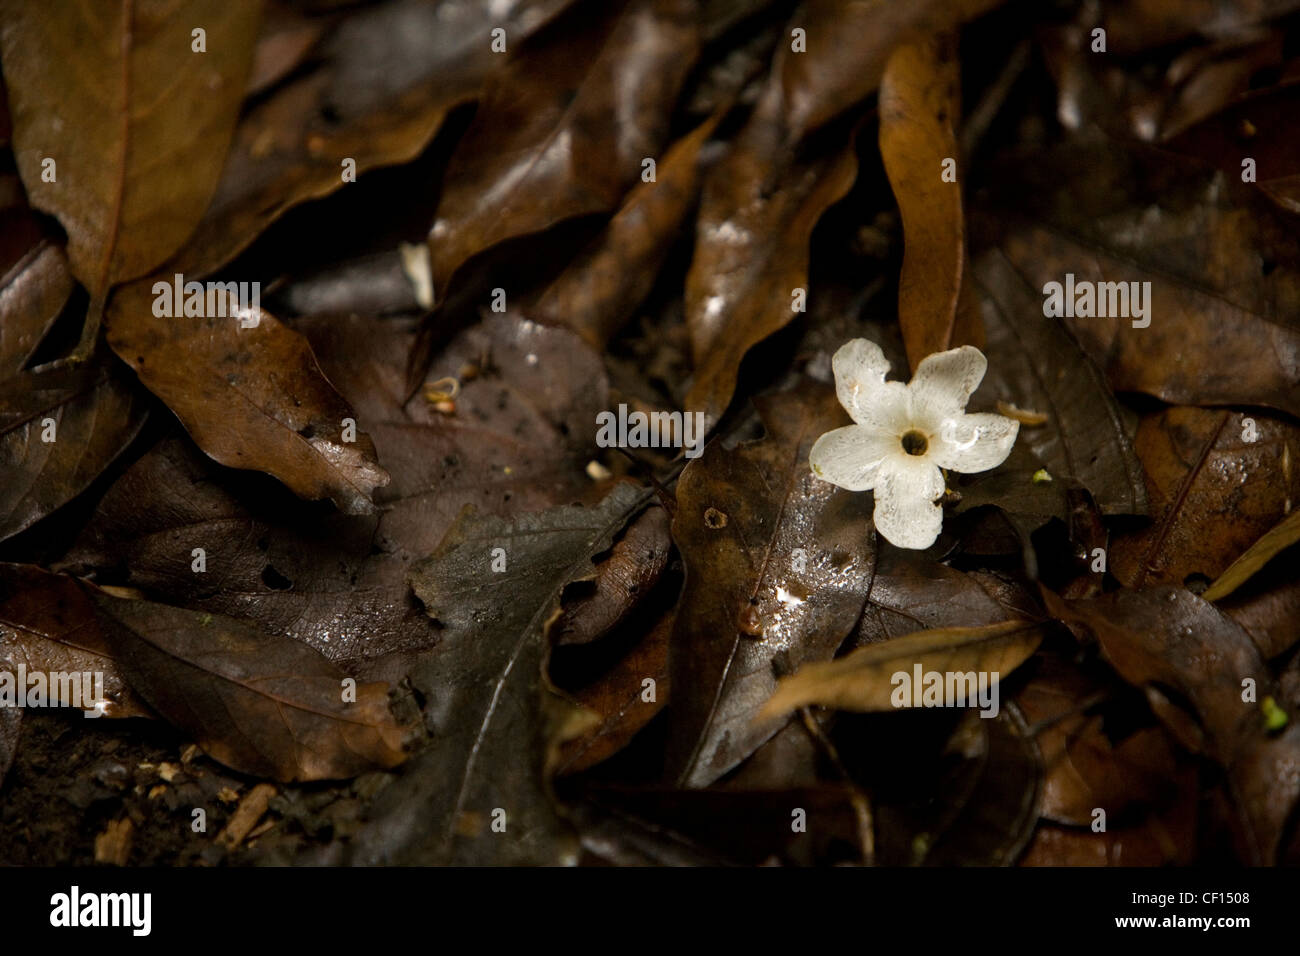 A white flower lays among brown leaves in El Triunfo Biosphere Reserve in the Sierra Madre mountains, Chiapas state, Mexico. Stock Photo